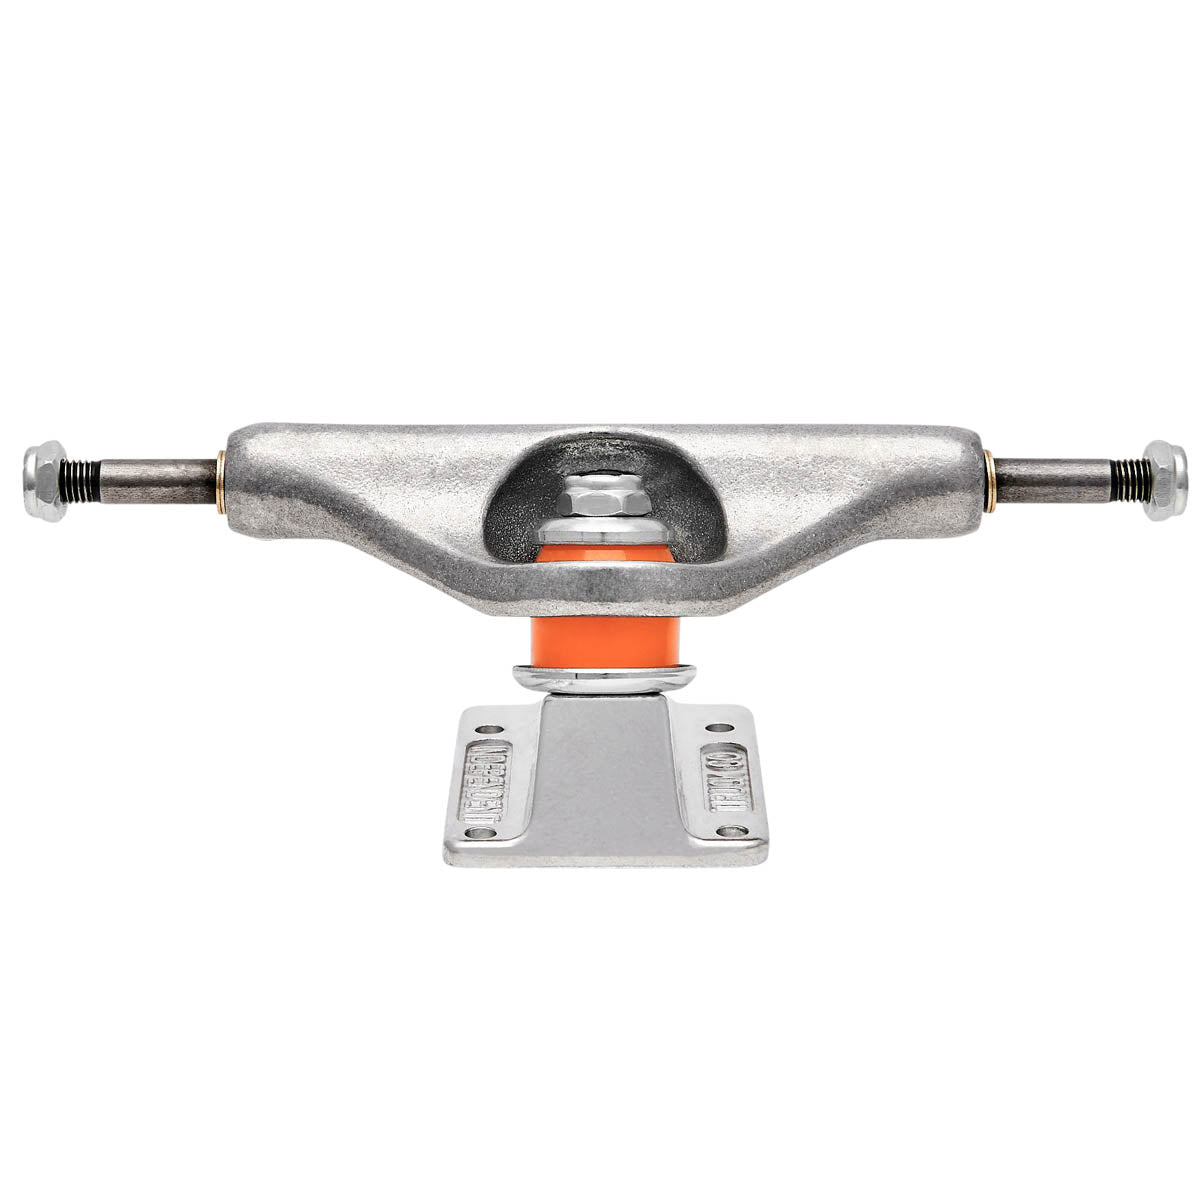 Independent Stage 11 Forged Hollow Skateboard Trucks - Silver image 4